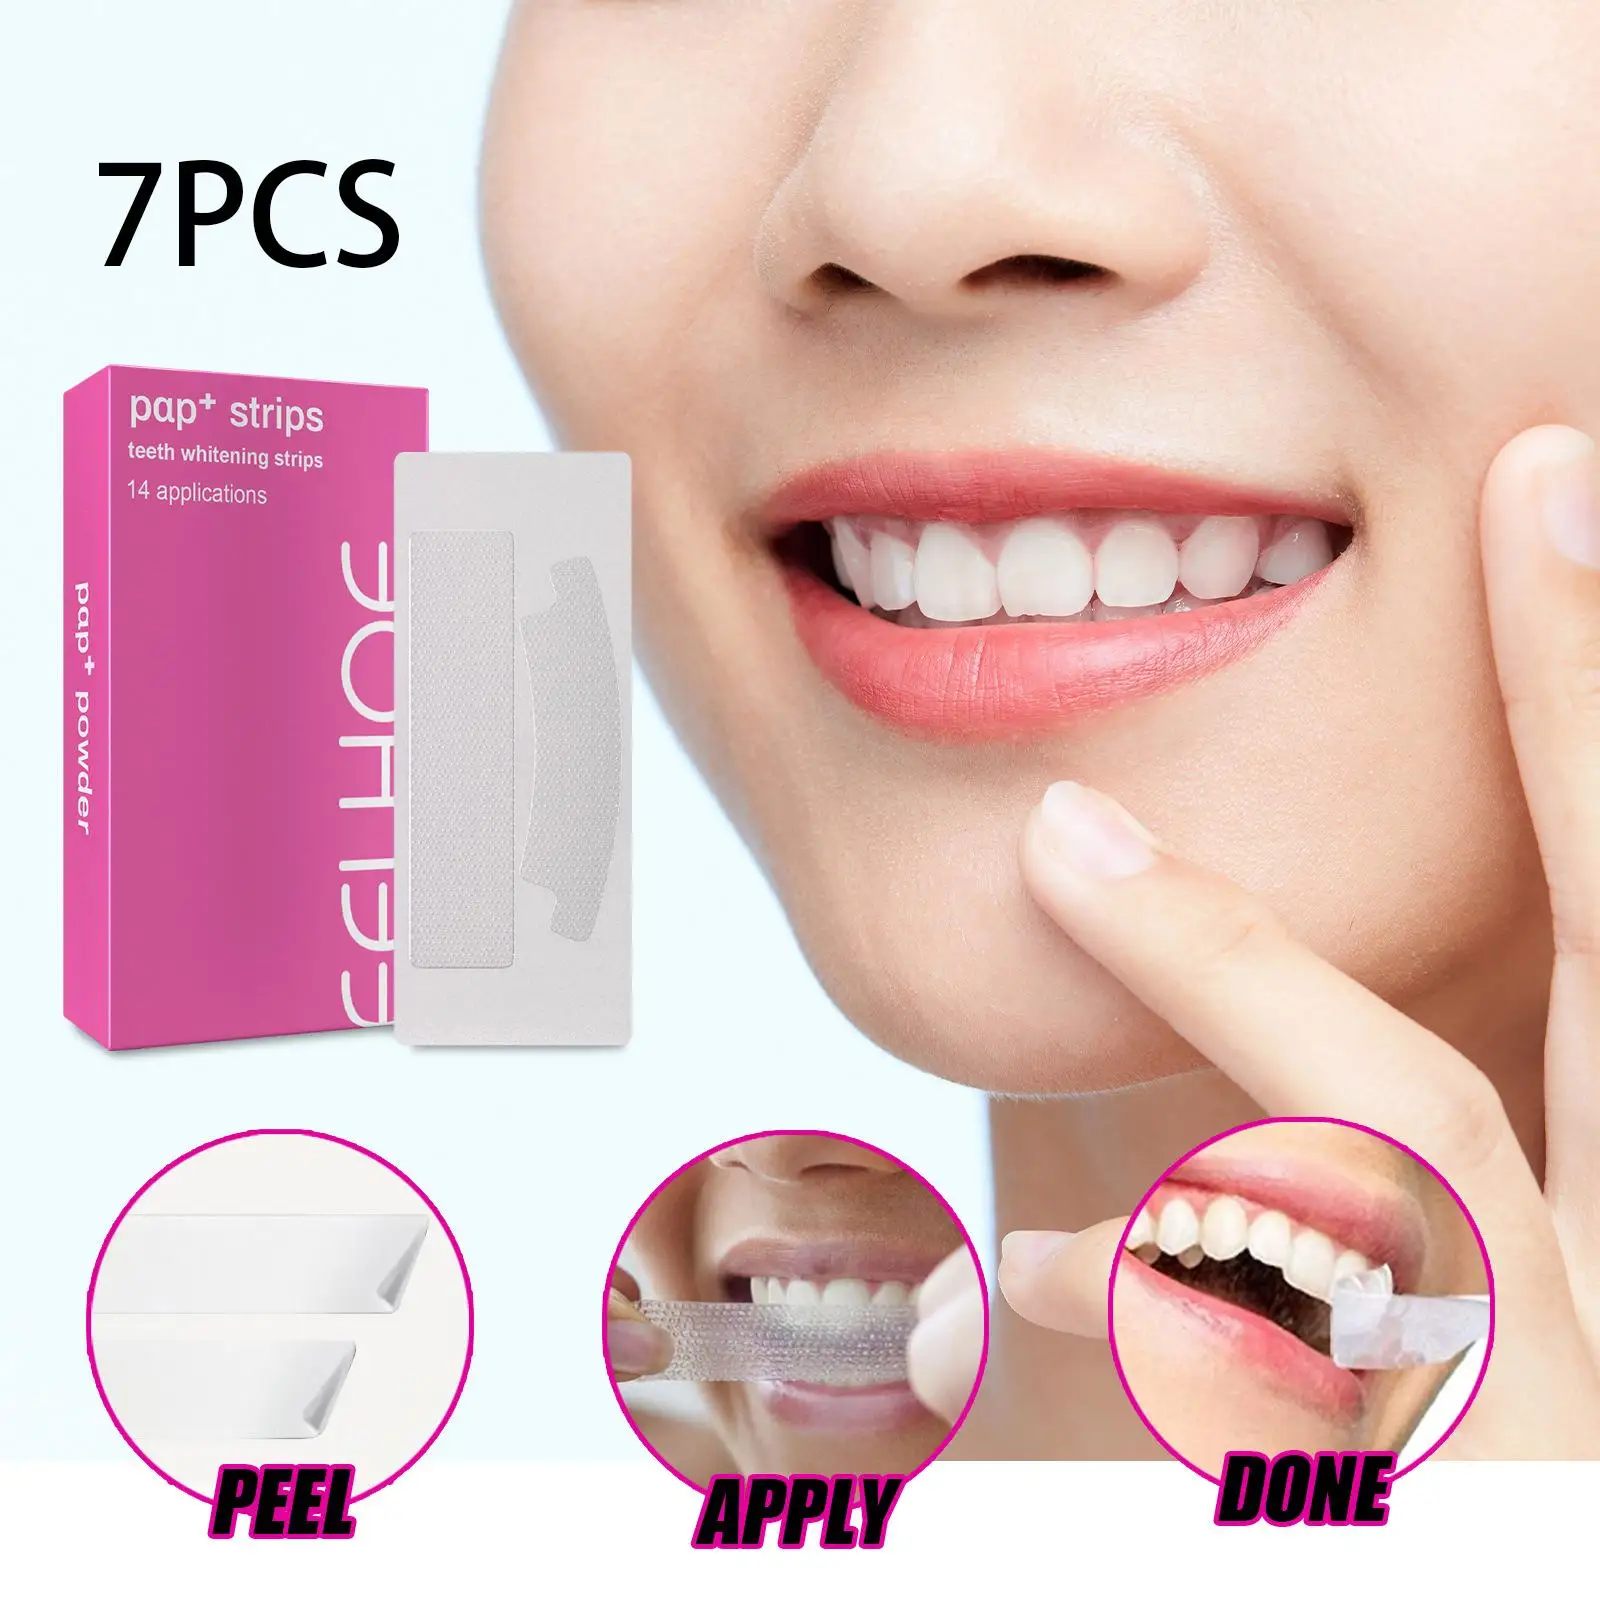 

Teeth Whitening Strips Oral Hygiene Care Non-Sensitive Tooth Whitening Gentle Tooth Stain Removal for Remove Smoking Wine Stains